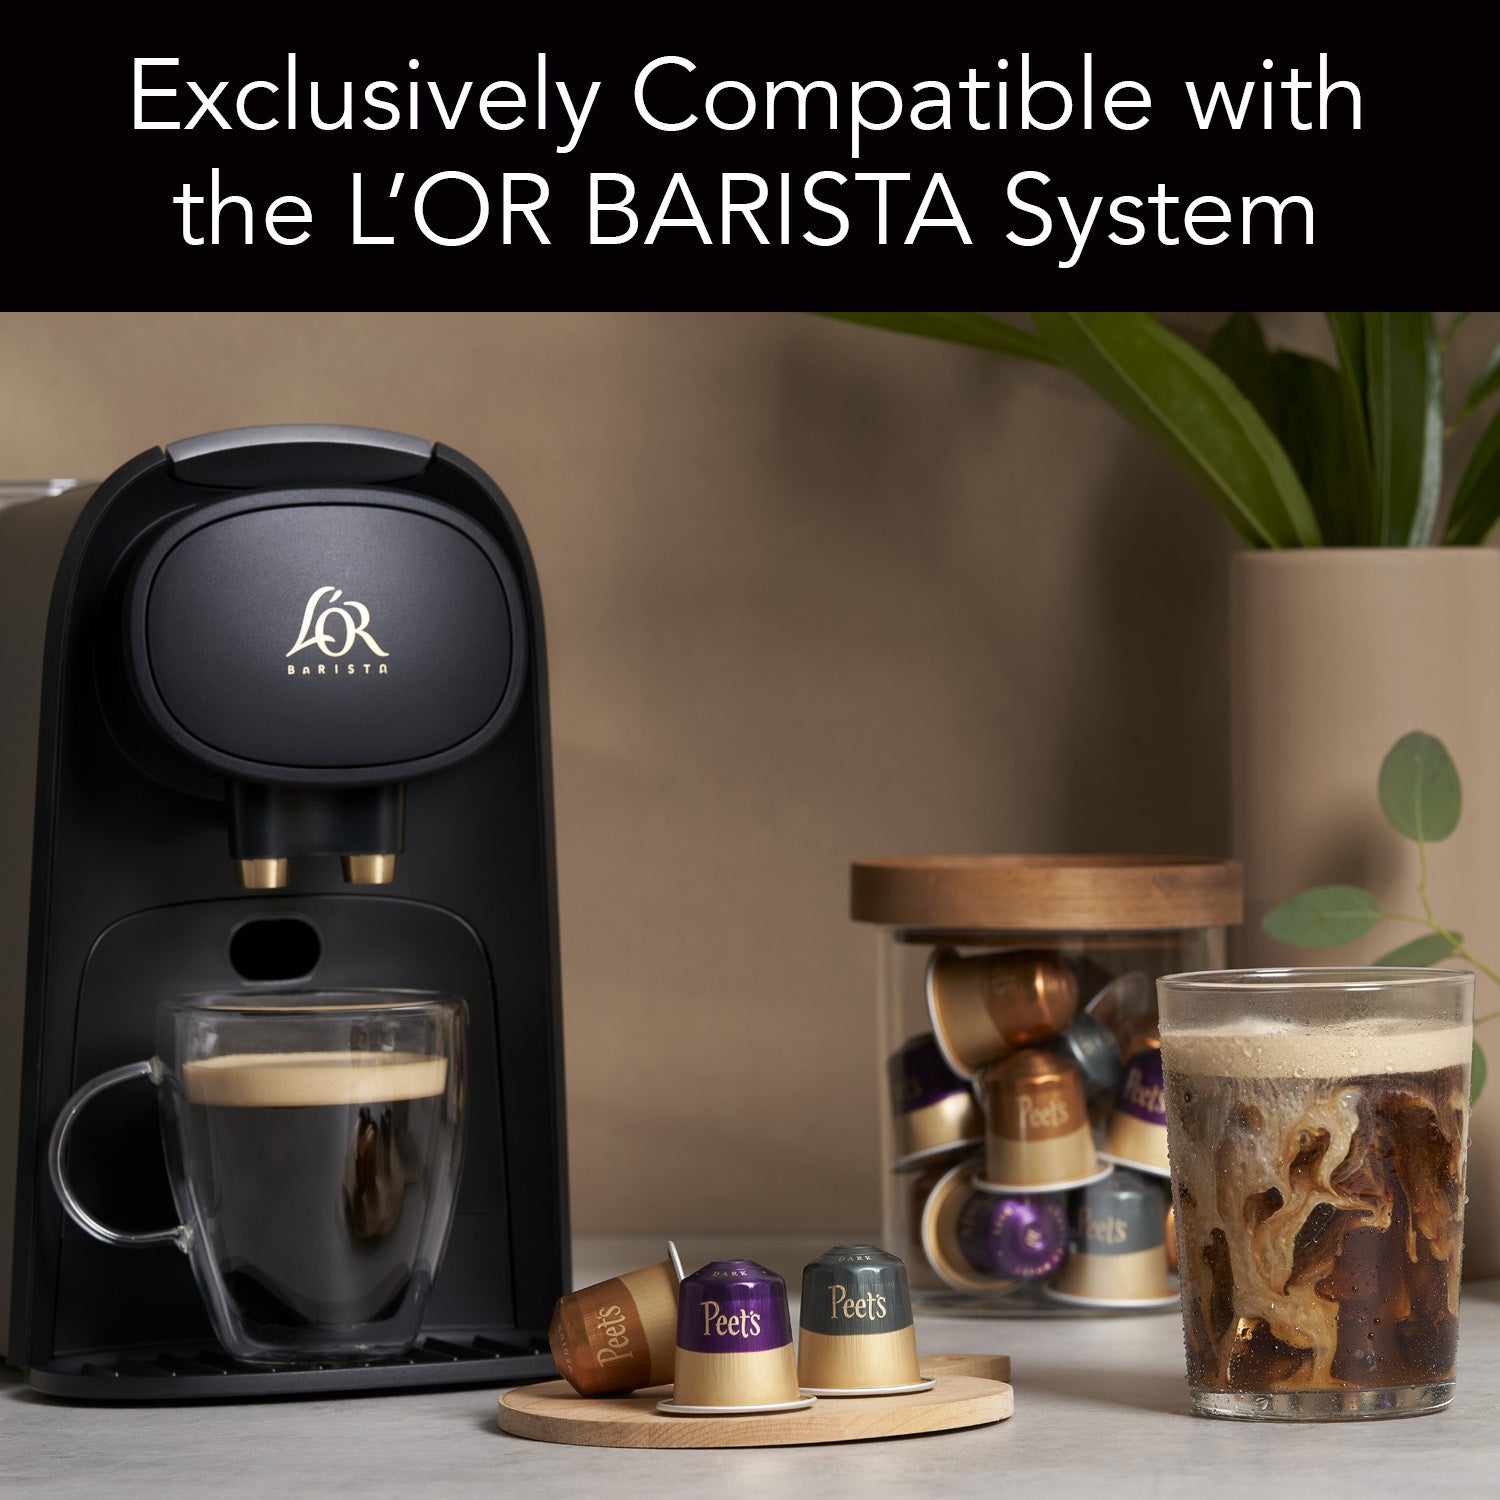 Exclusively compatible with the L'OR BARISTA System